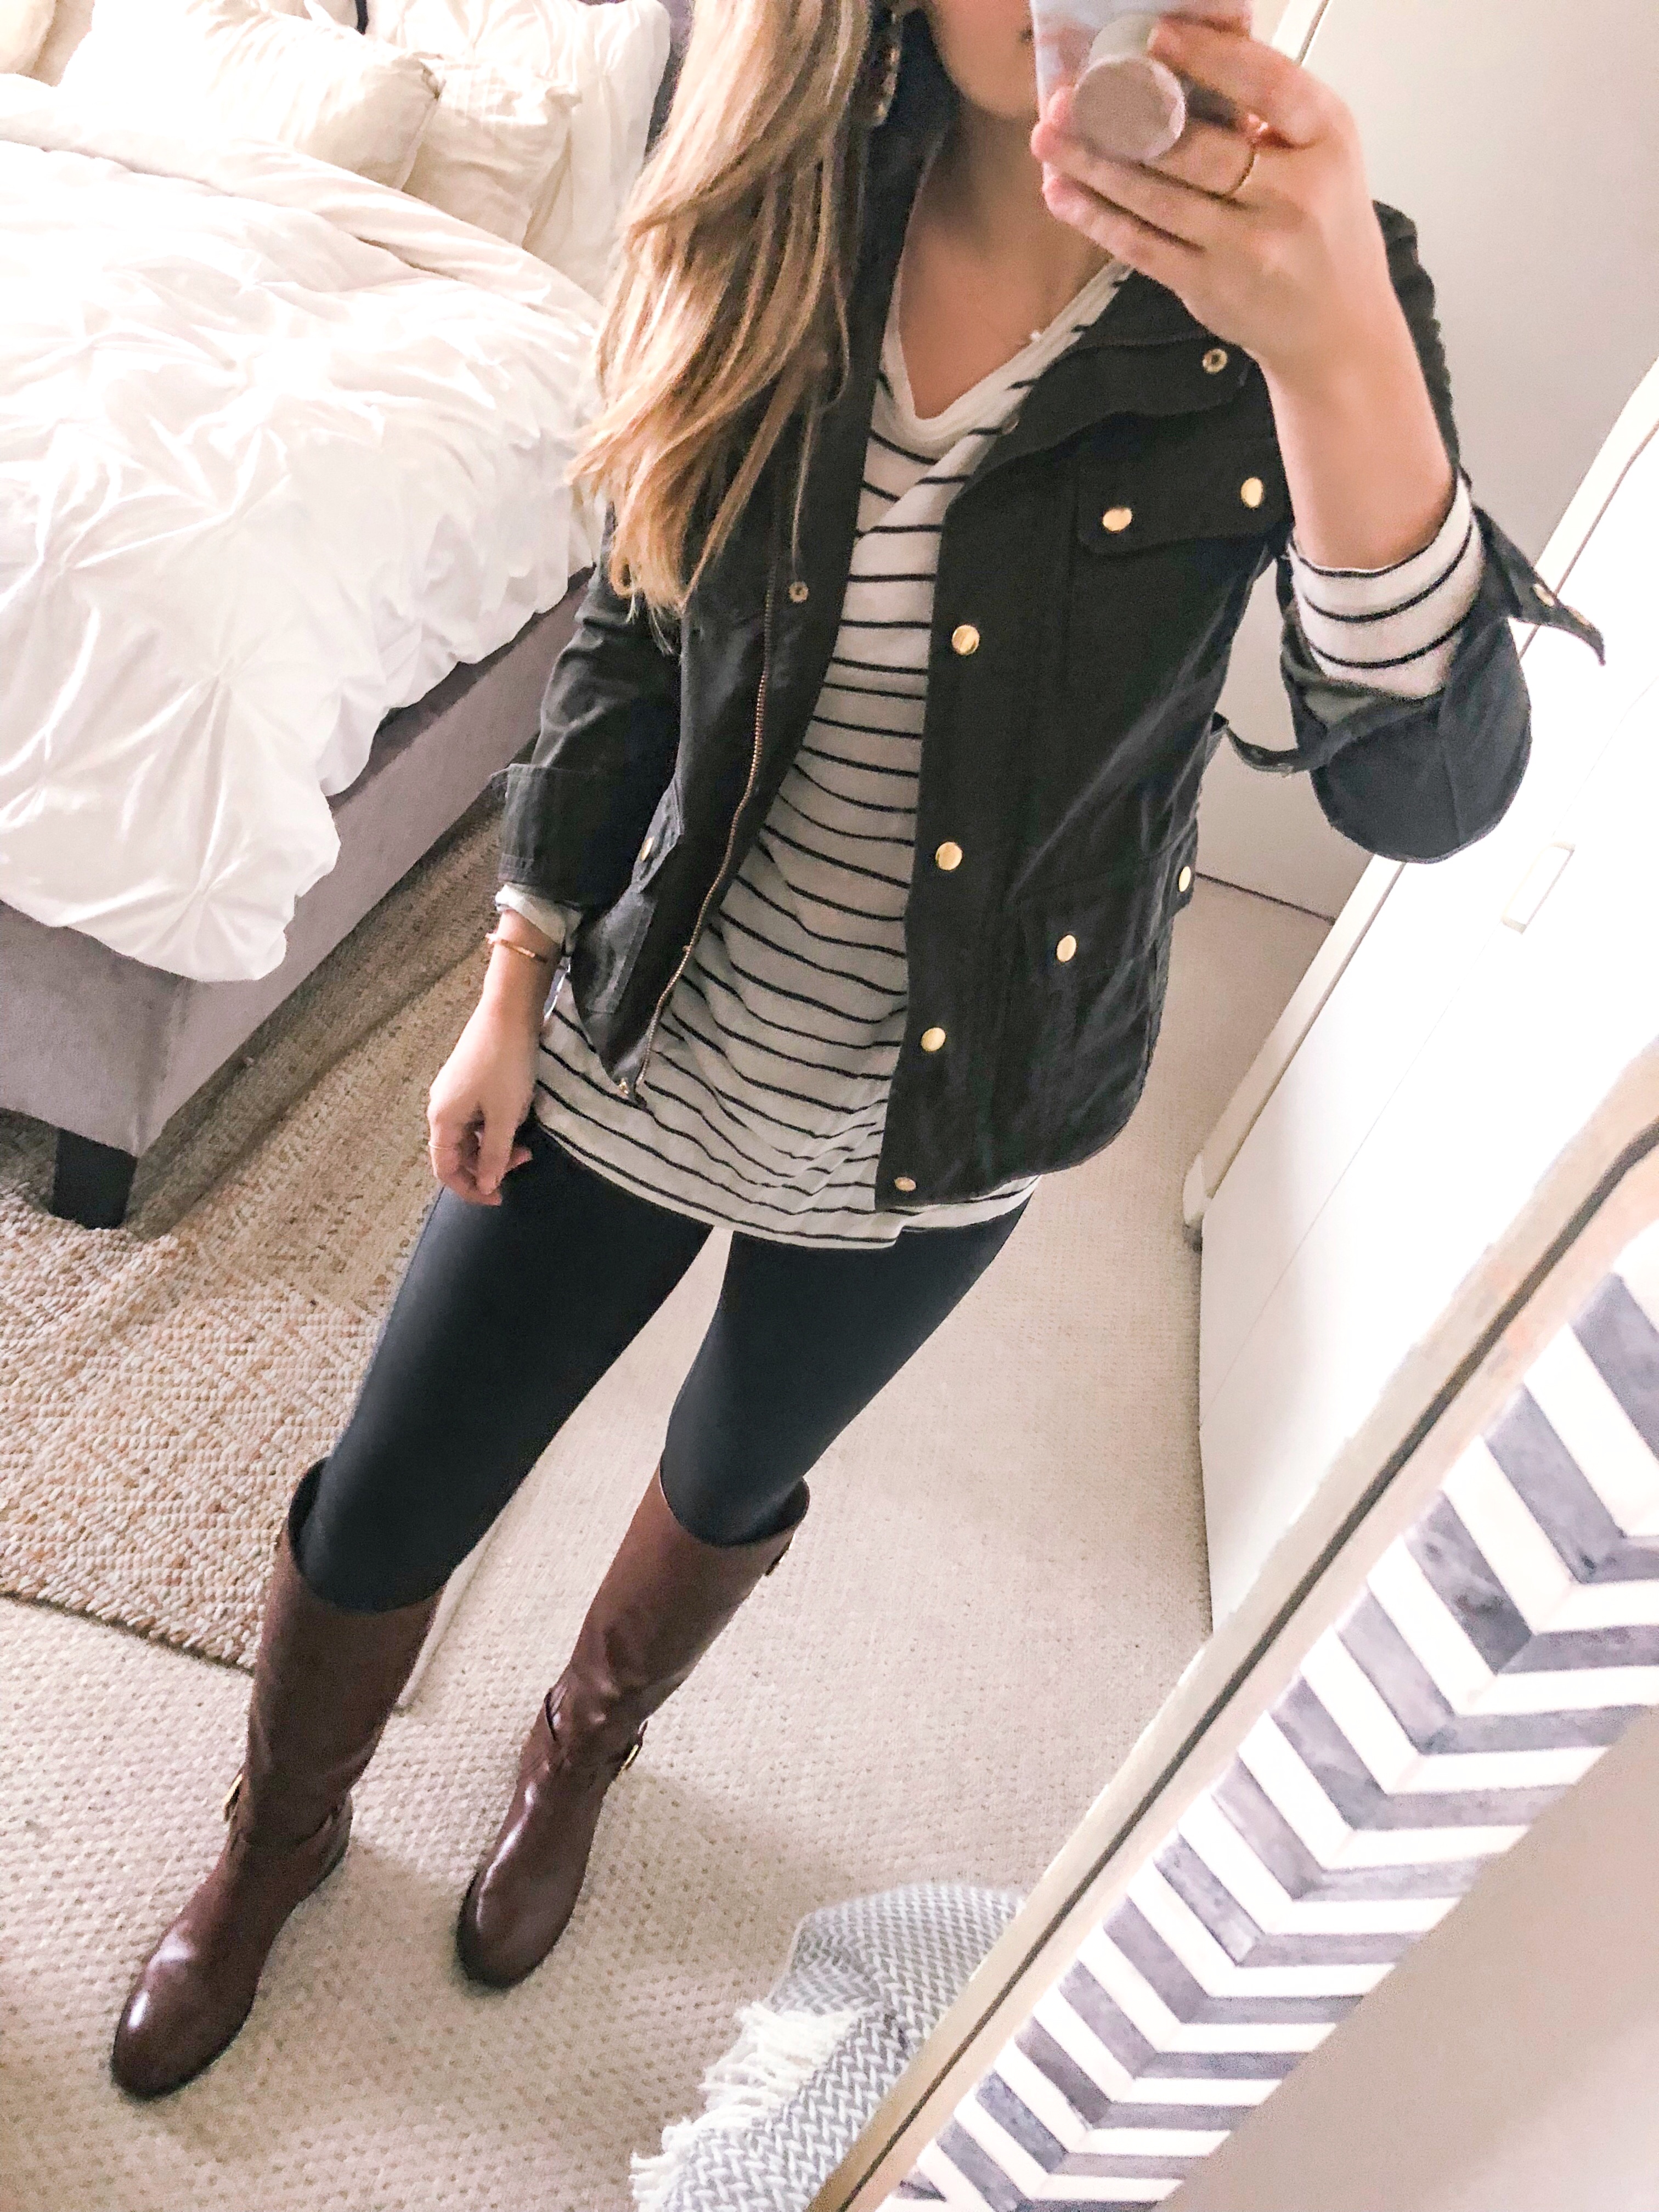 weekend outfit idea with a green jacket and striped shirt